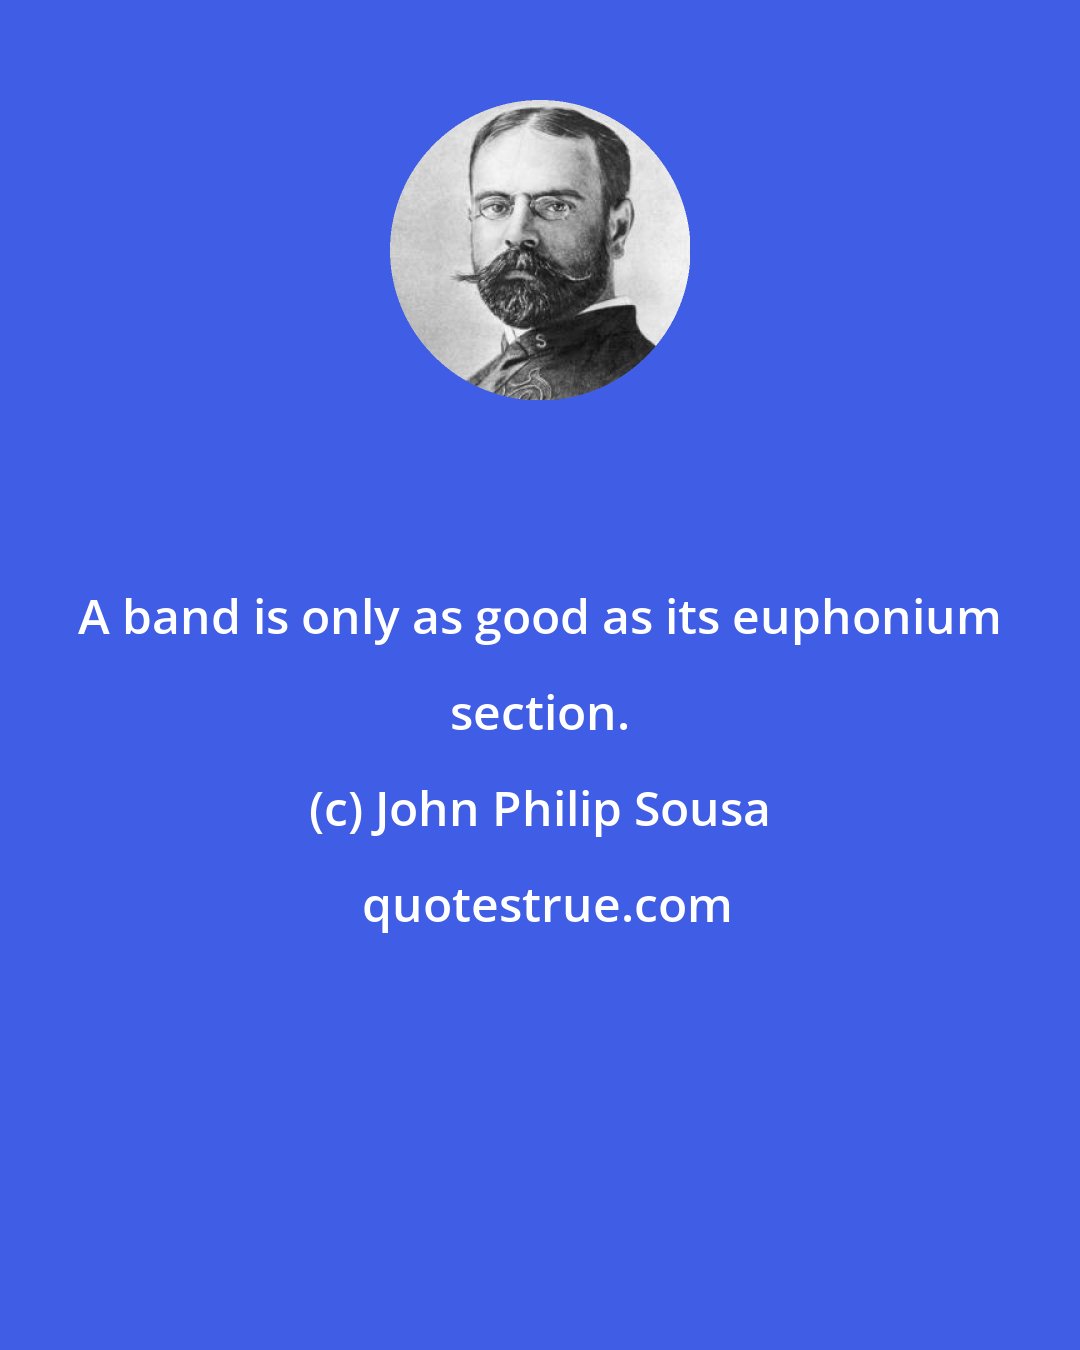 John Philip Sousa: A band is only as good as its euphonium section.